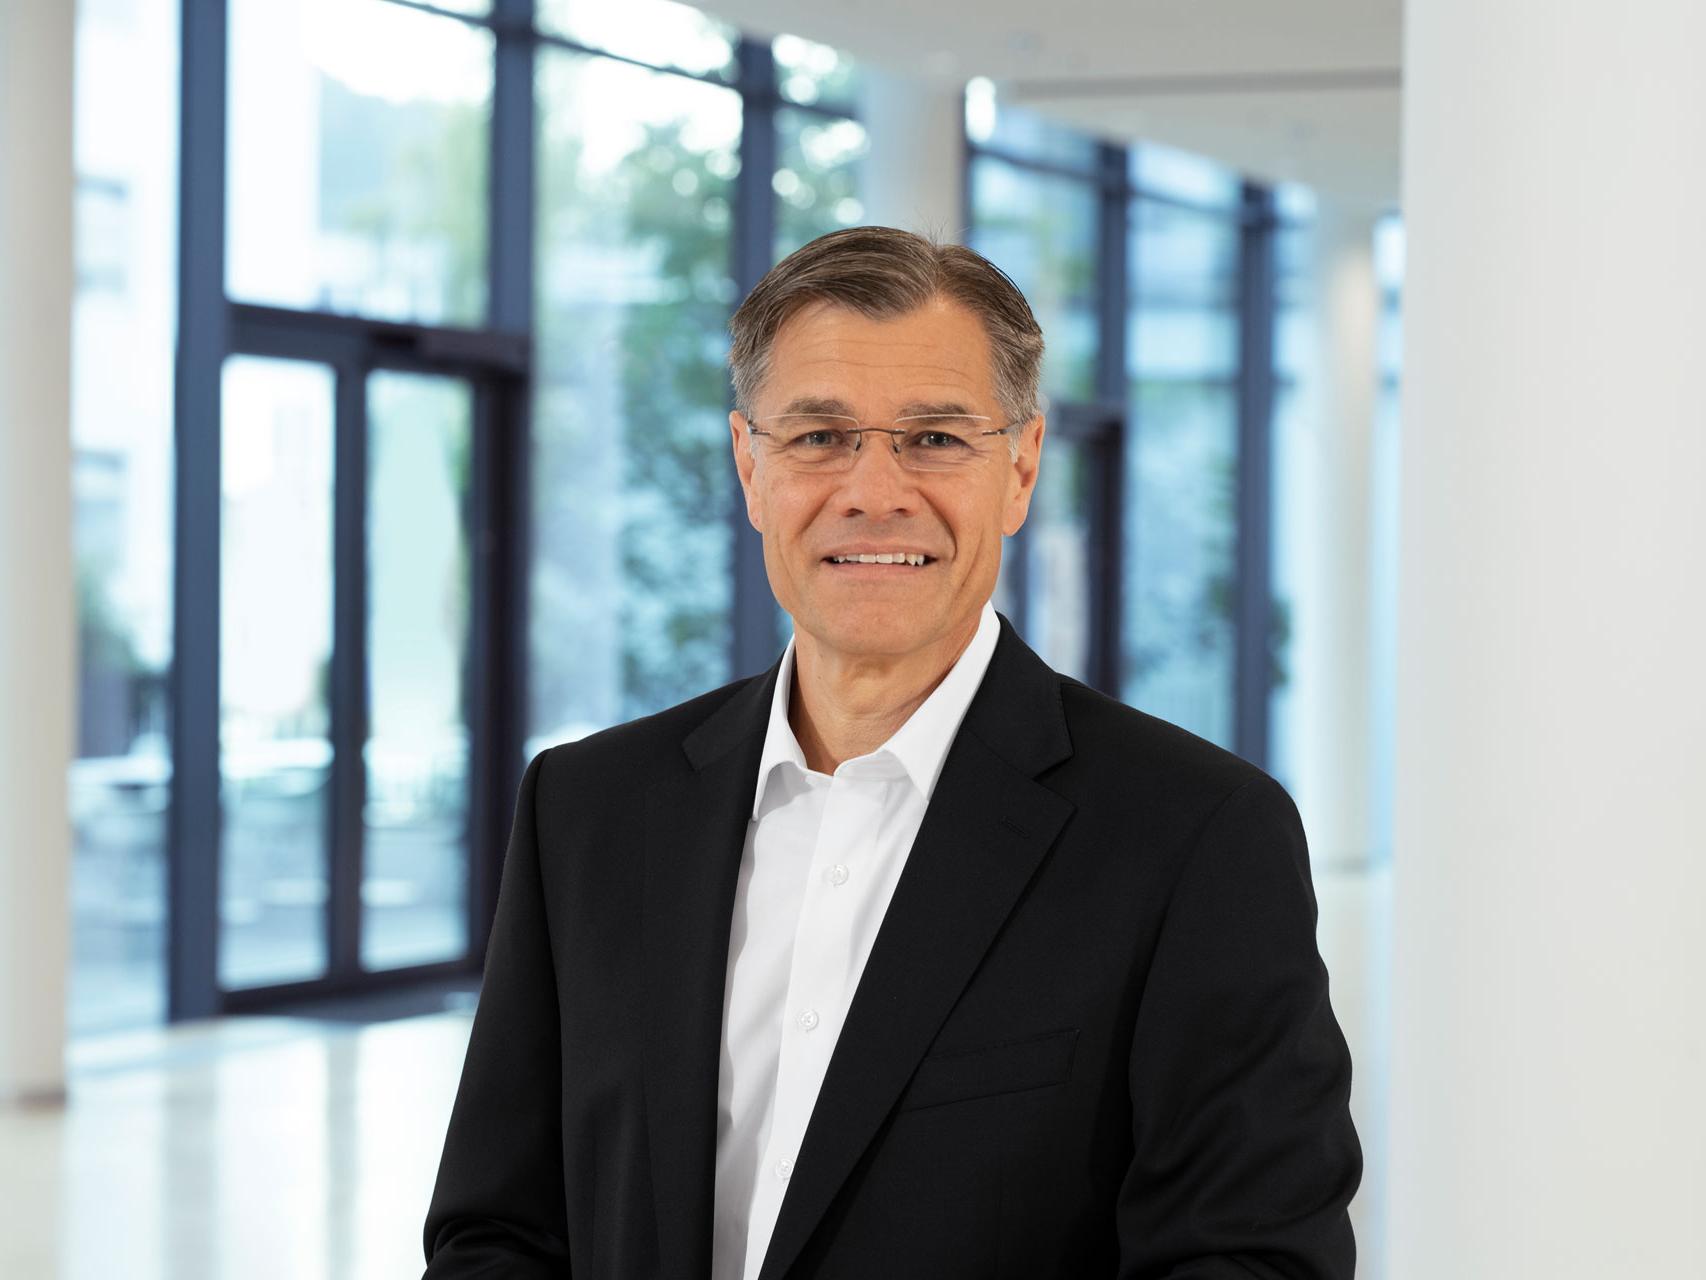 Dr. Karl Lamprecht President and CEO of the ZEISS Group